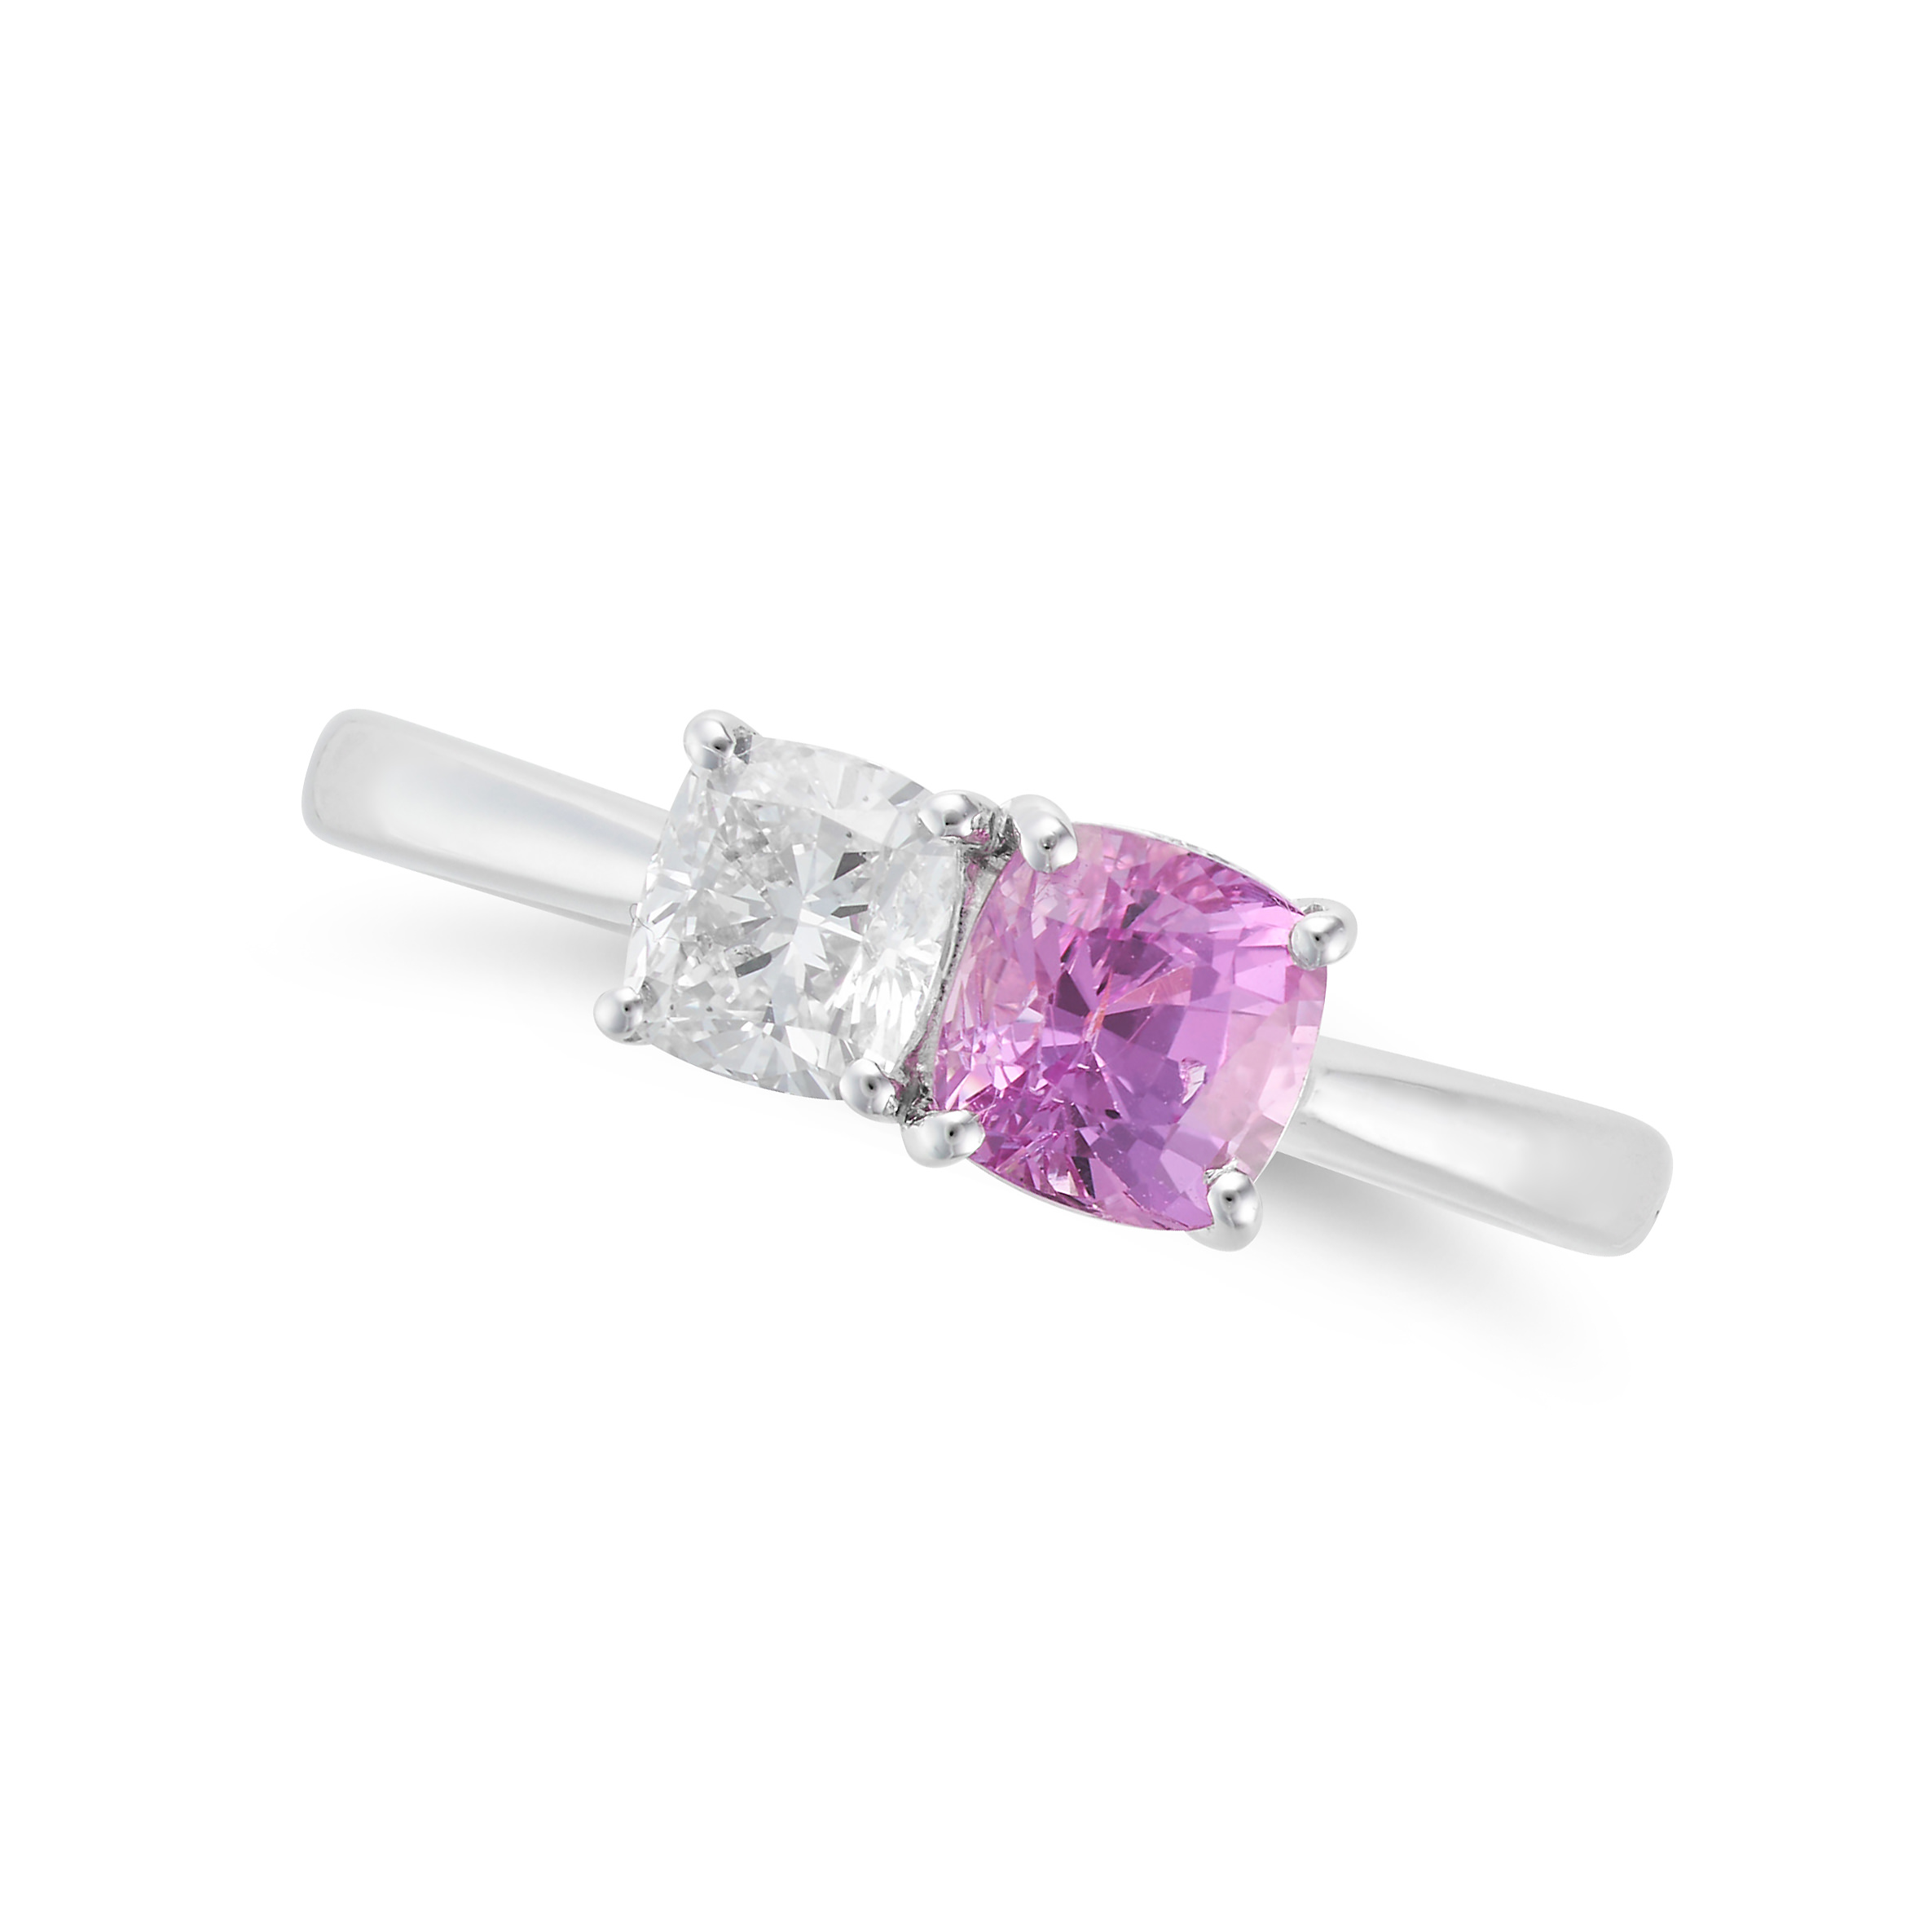 A PINK SAPPHIRE AND DIAMOND RING in platinum, set with a cushion cut pink sapphire of 1.03 carats...